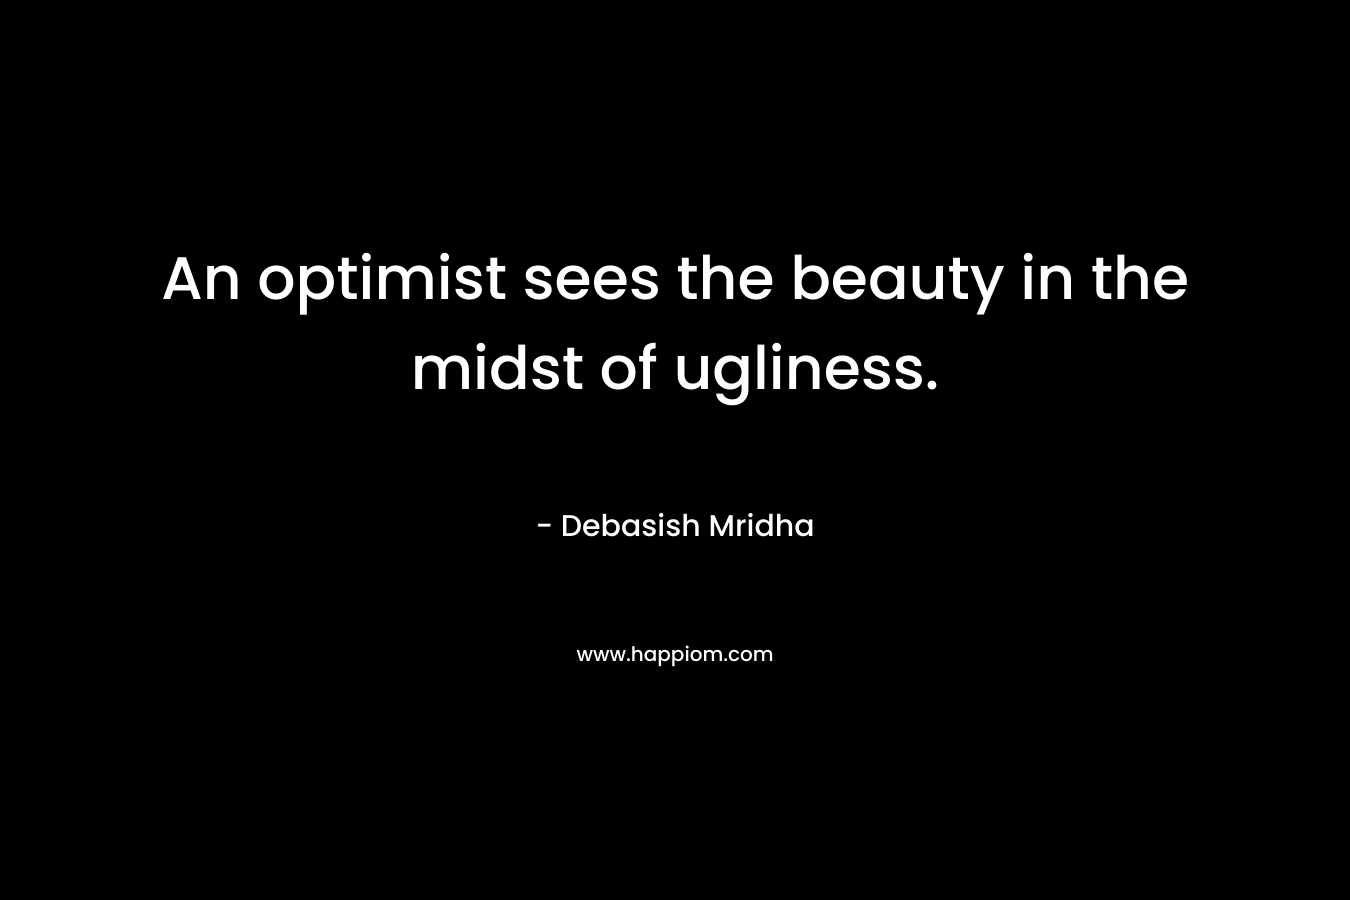 An optimist sees the beauty in the midst of ugliness. – Debasish Mridha